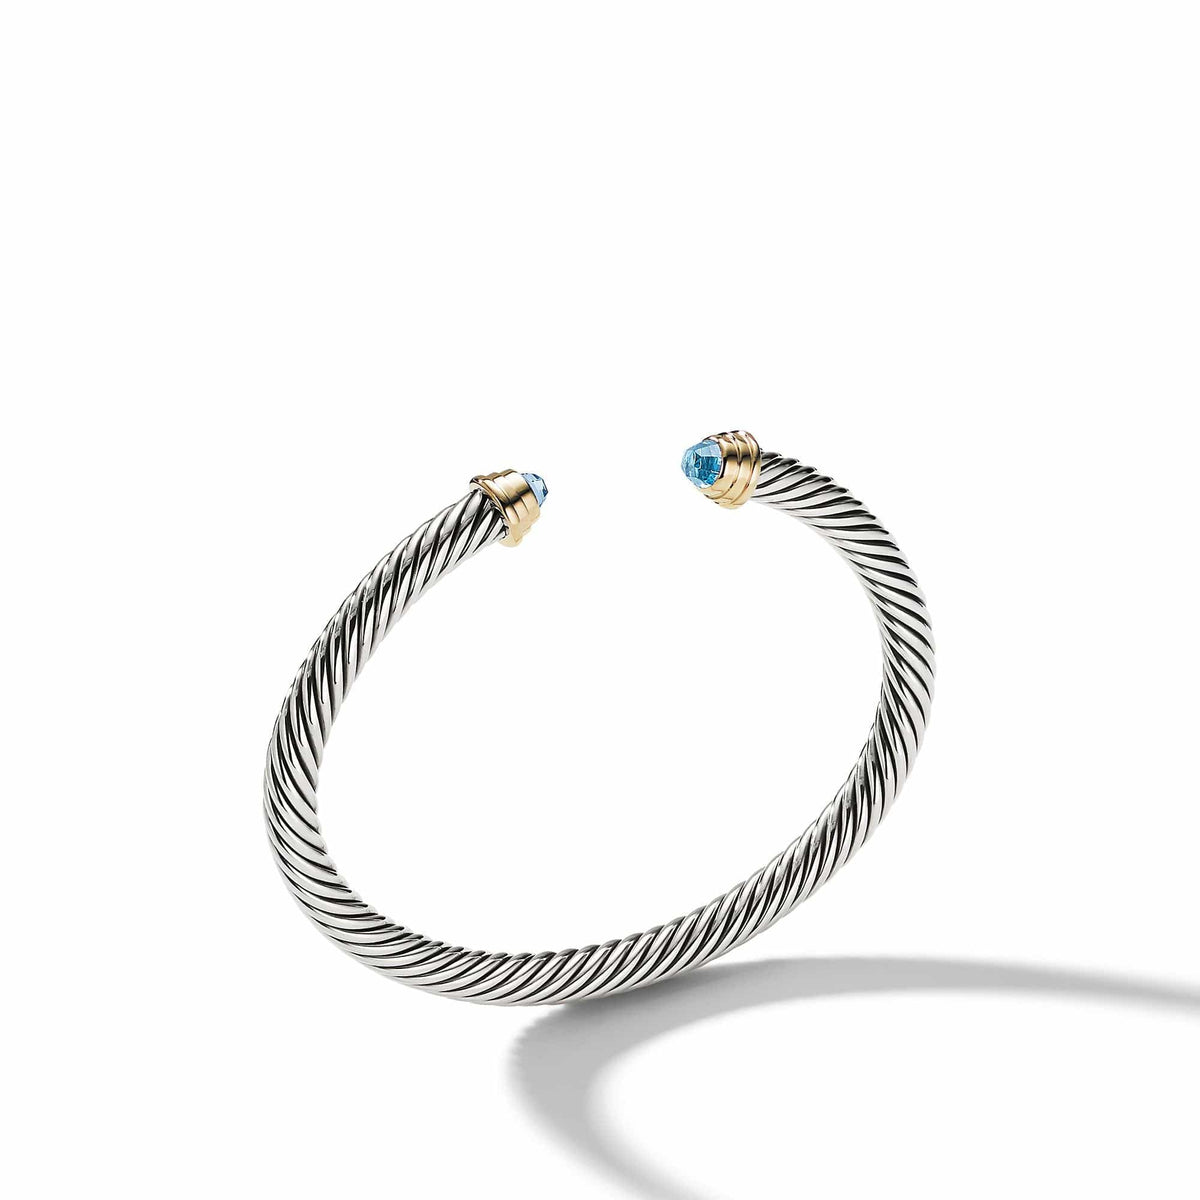 Cable Kids® Birthstone Bracelet with Blue Topaz and 14K Gold, 4mm, Sterling Silver, Long's Jewelers